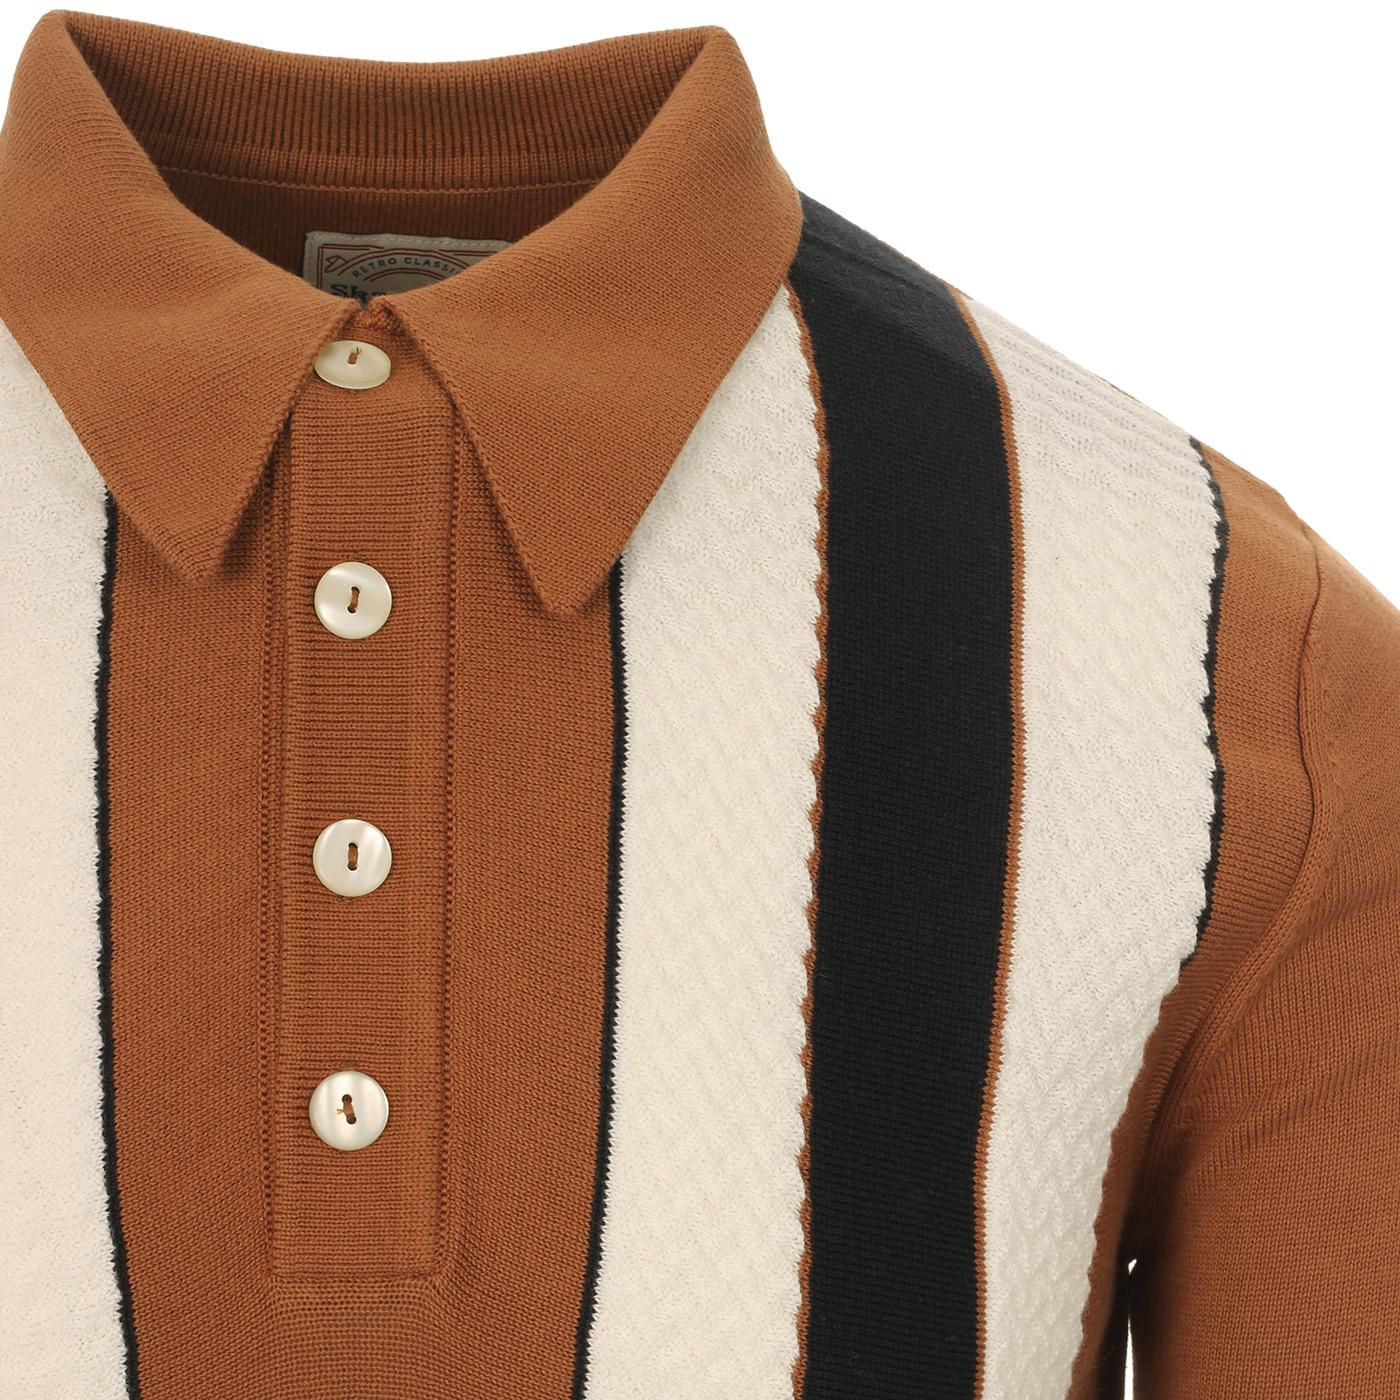 SKA & SOUL 60s Mod Texture Stripe LS Knit Polo Top in Ginger